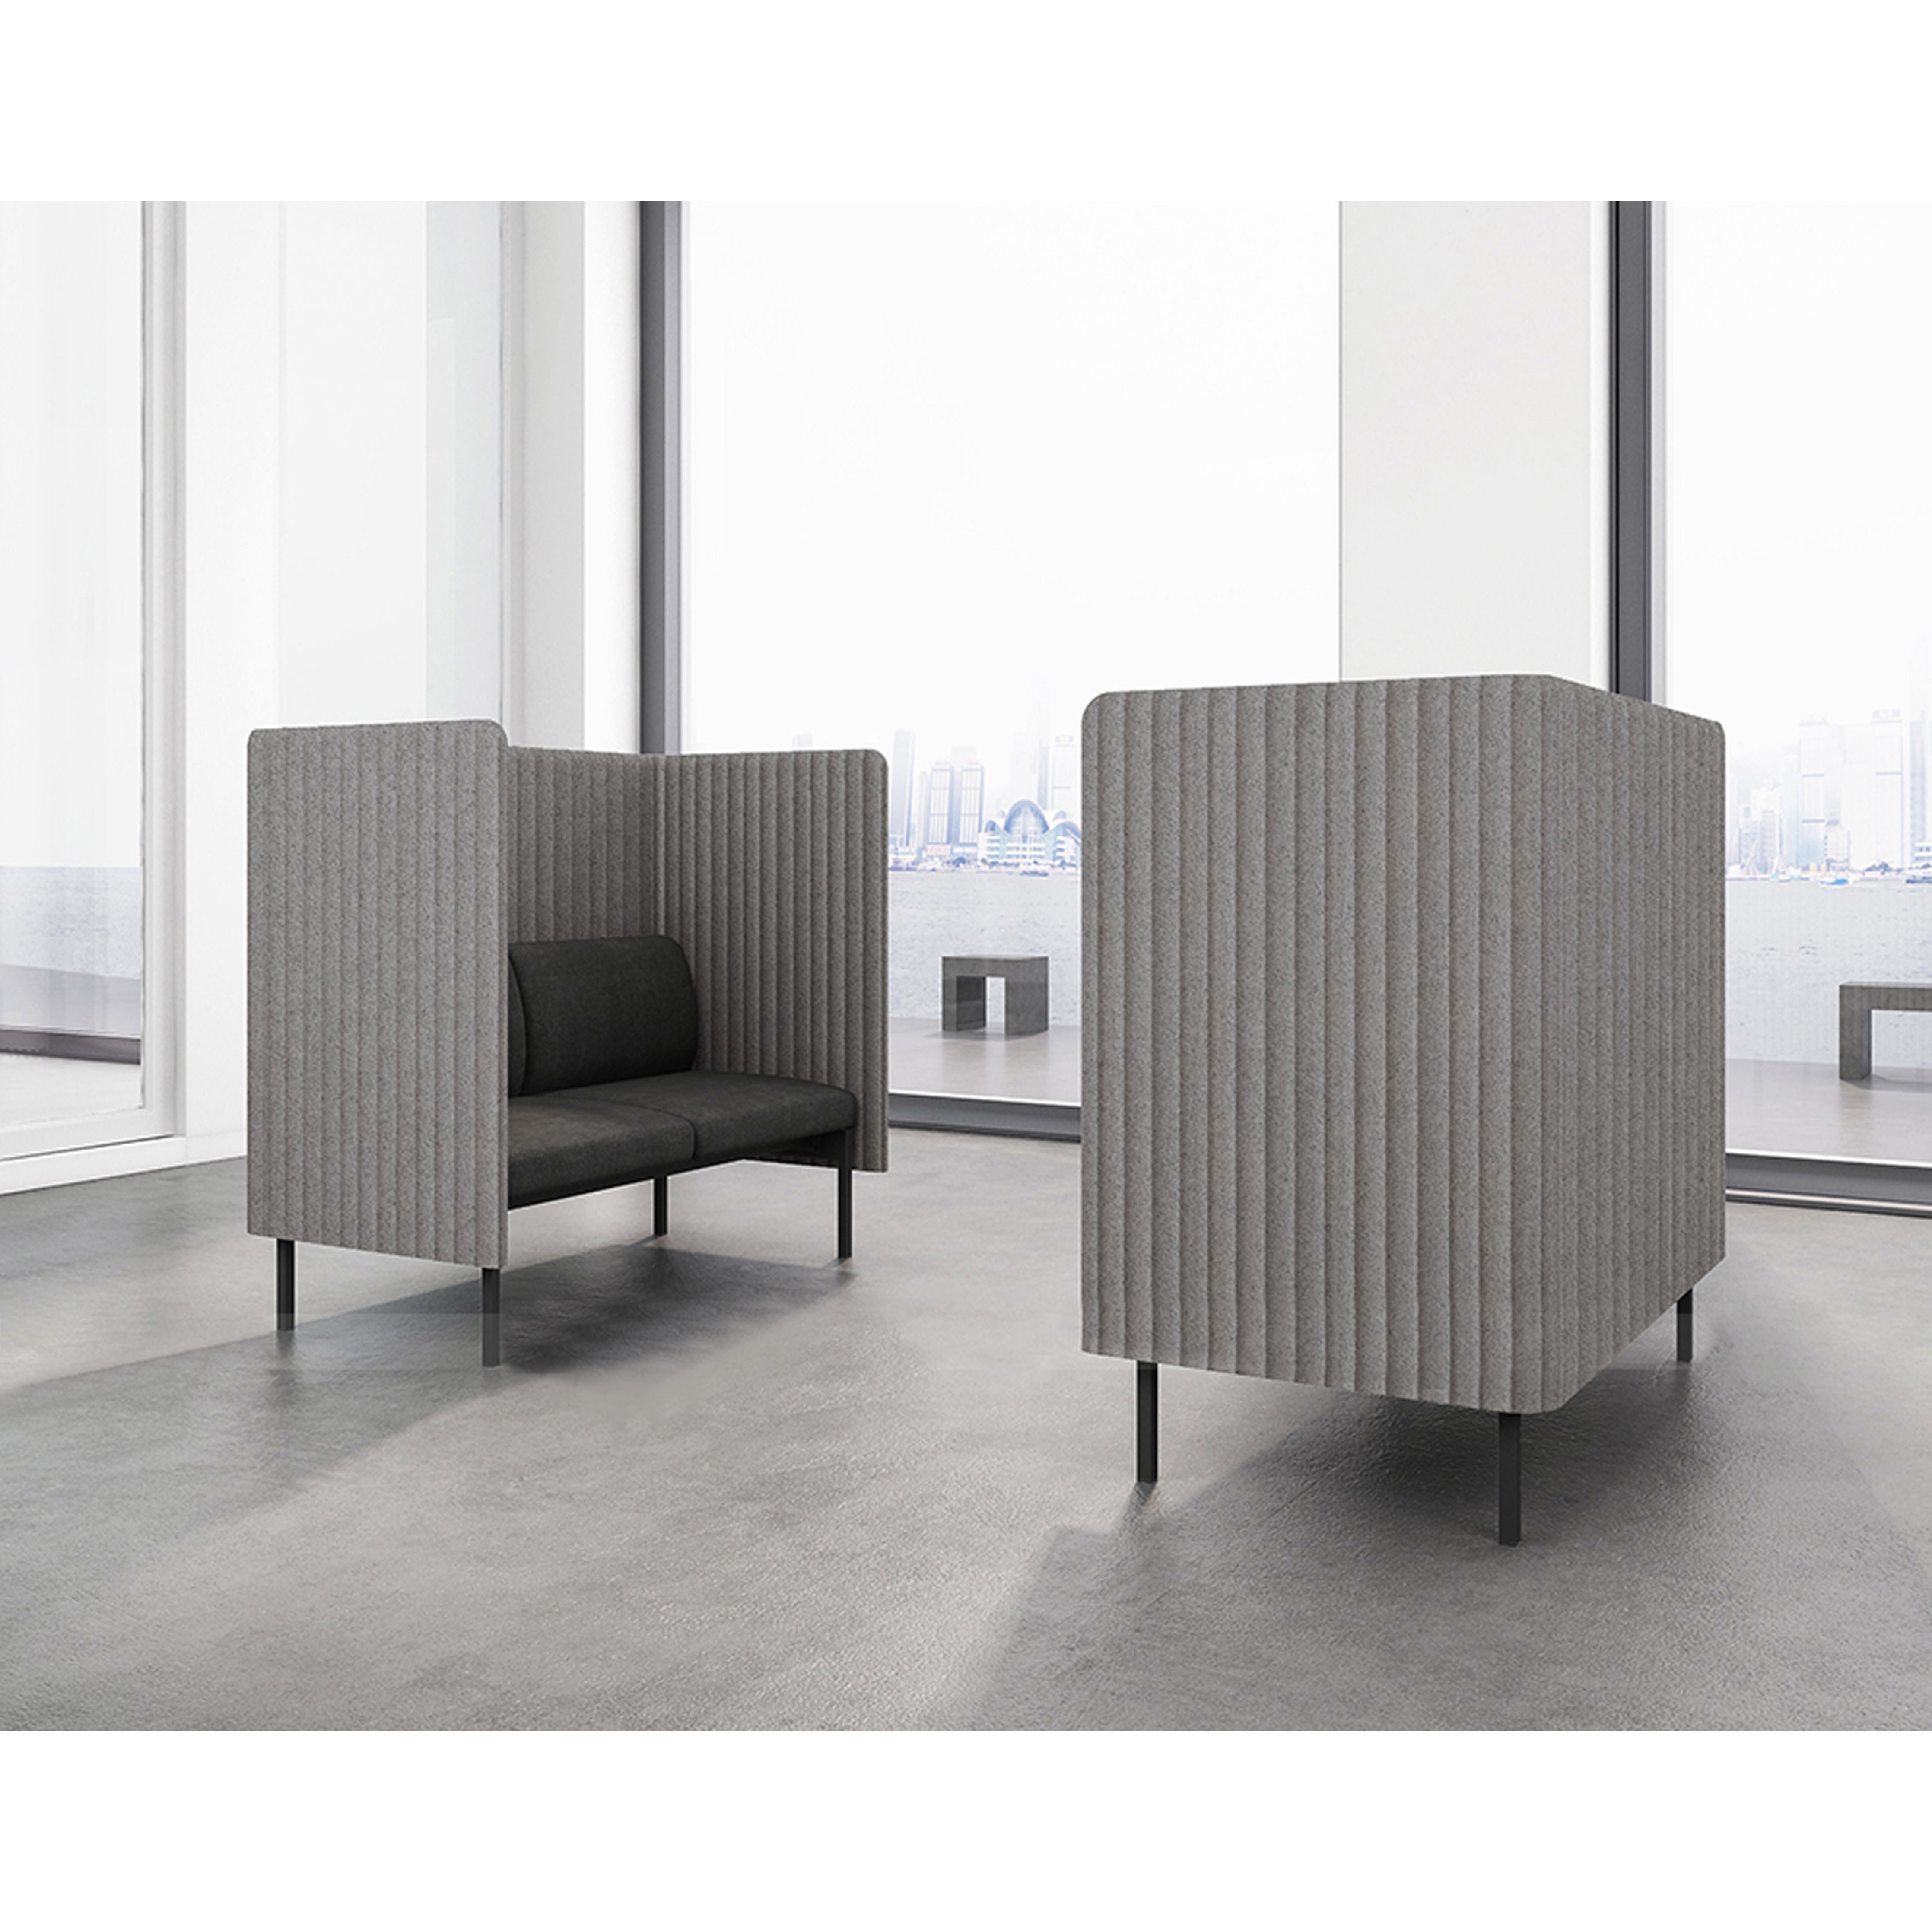 Bequiet I - 2/3 Seater Highback with Power Point